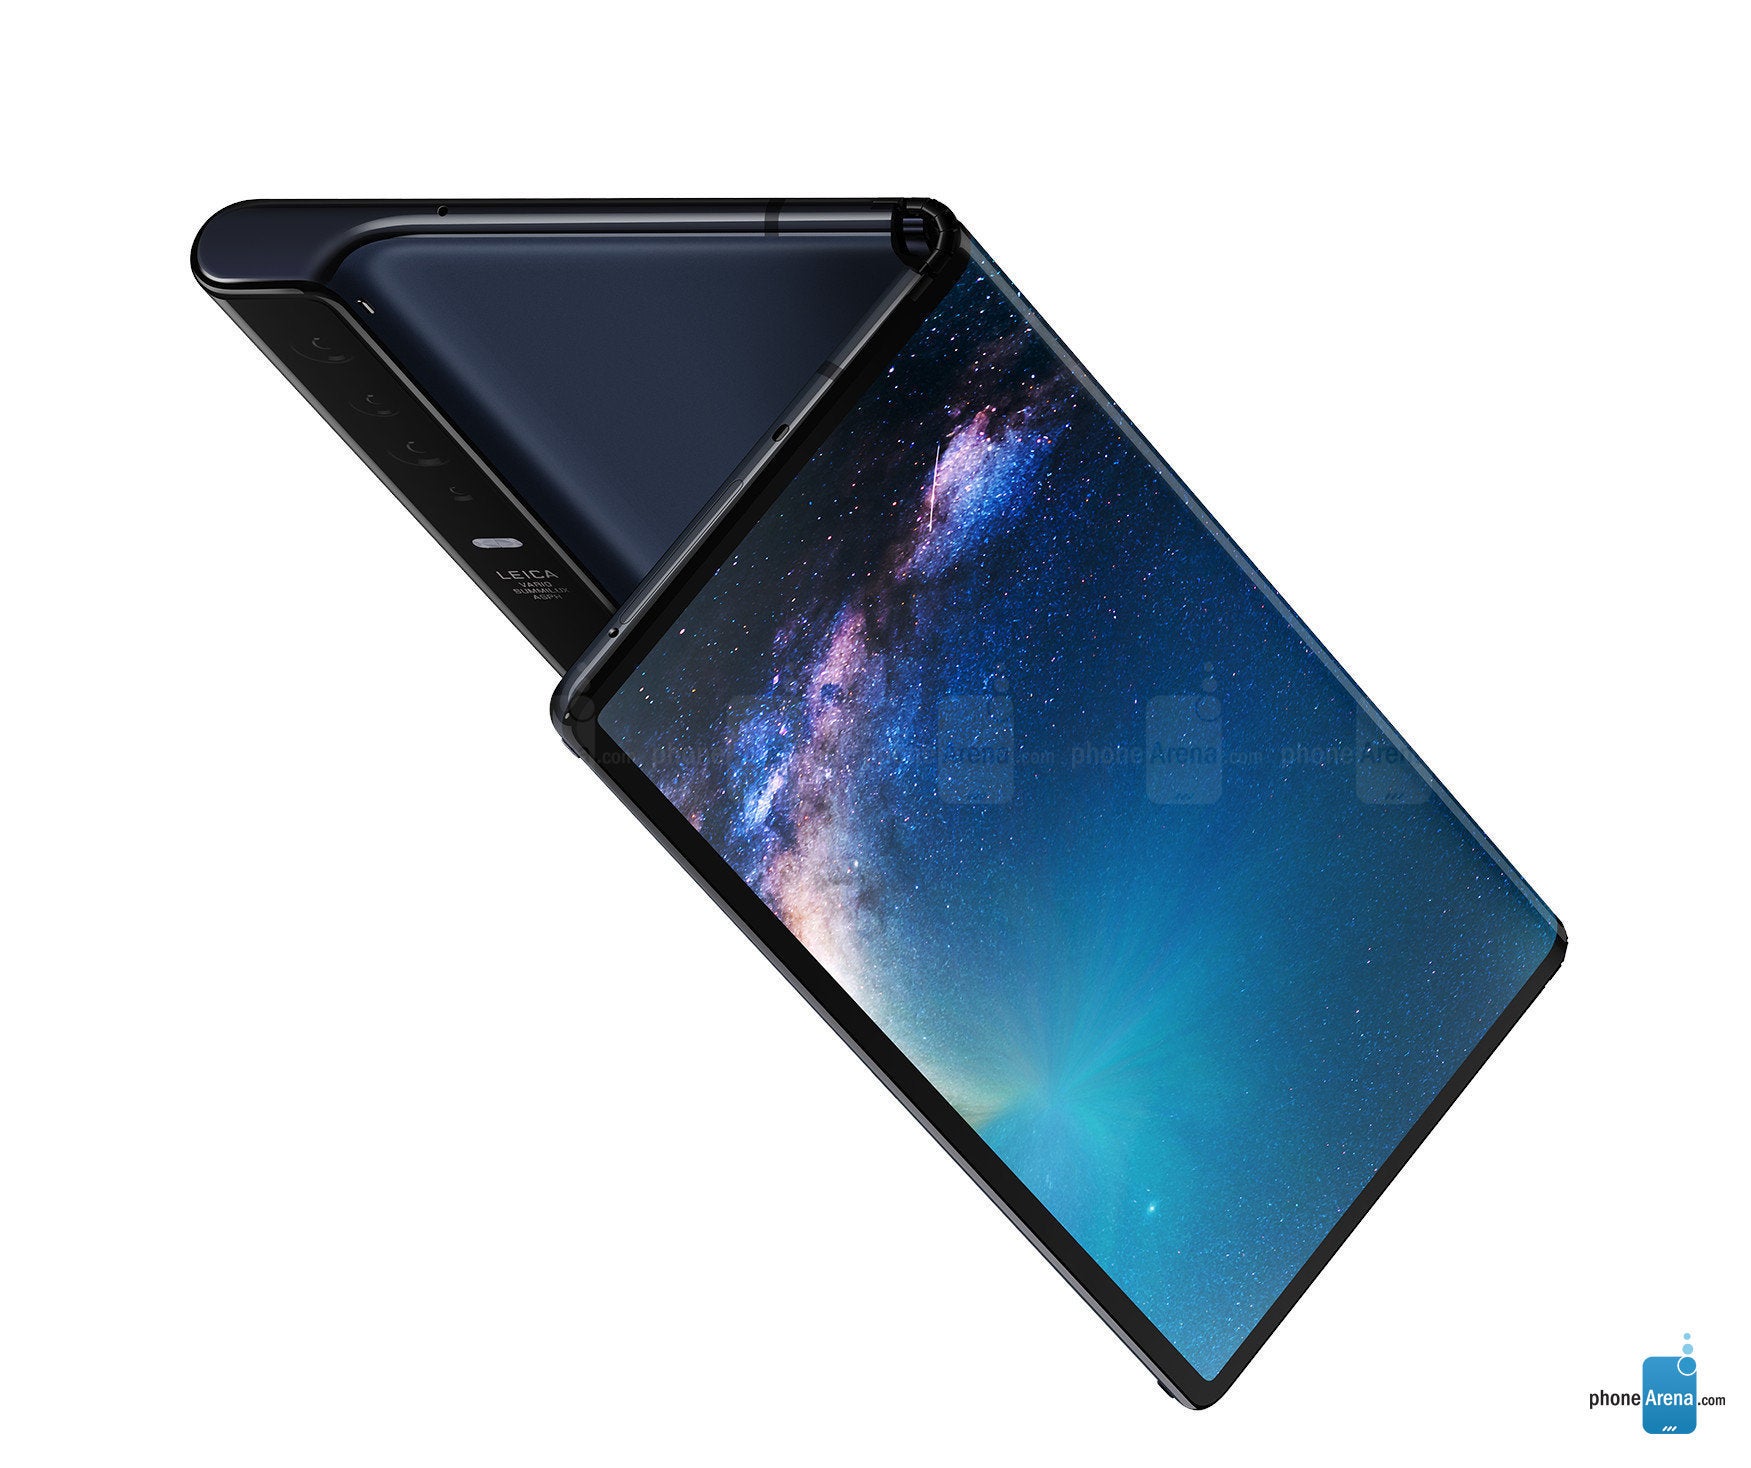 The foldable Huawei Mate X should launch with Android pre-installed - HongMengOS is &quot;likely&quot; faster than Android and iOS says Huawei founder and CEO